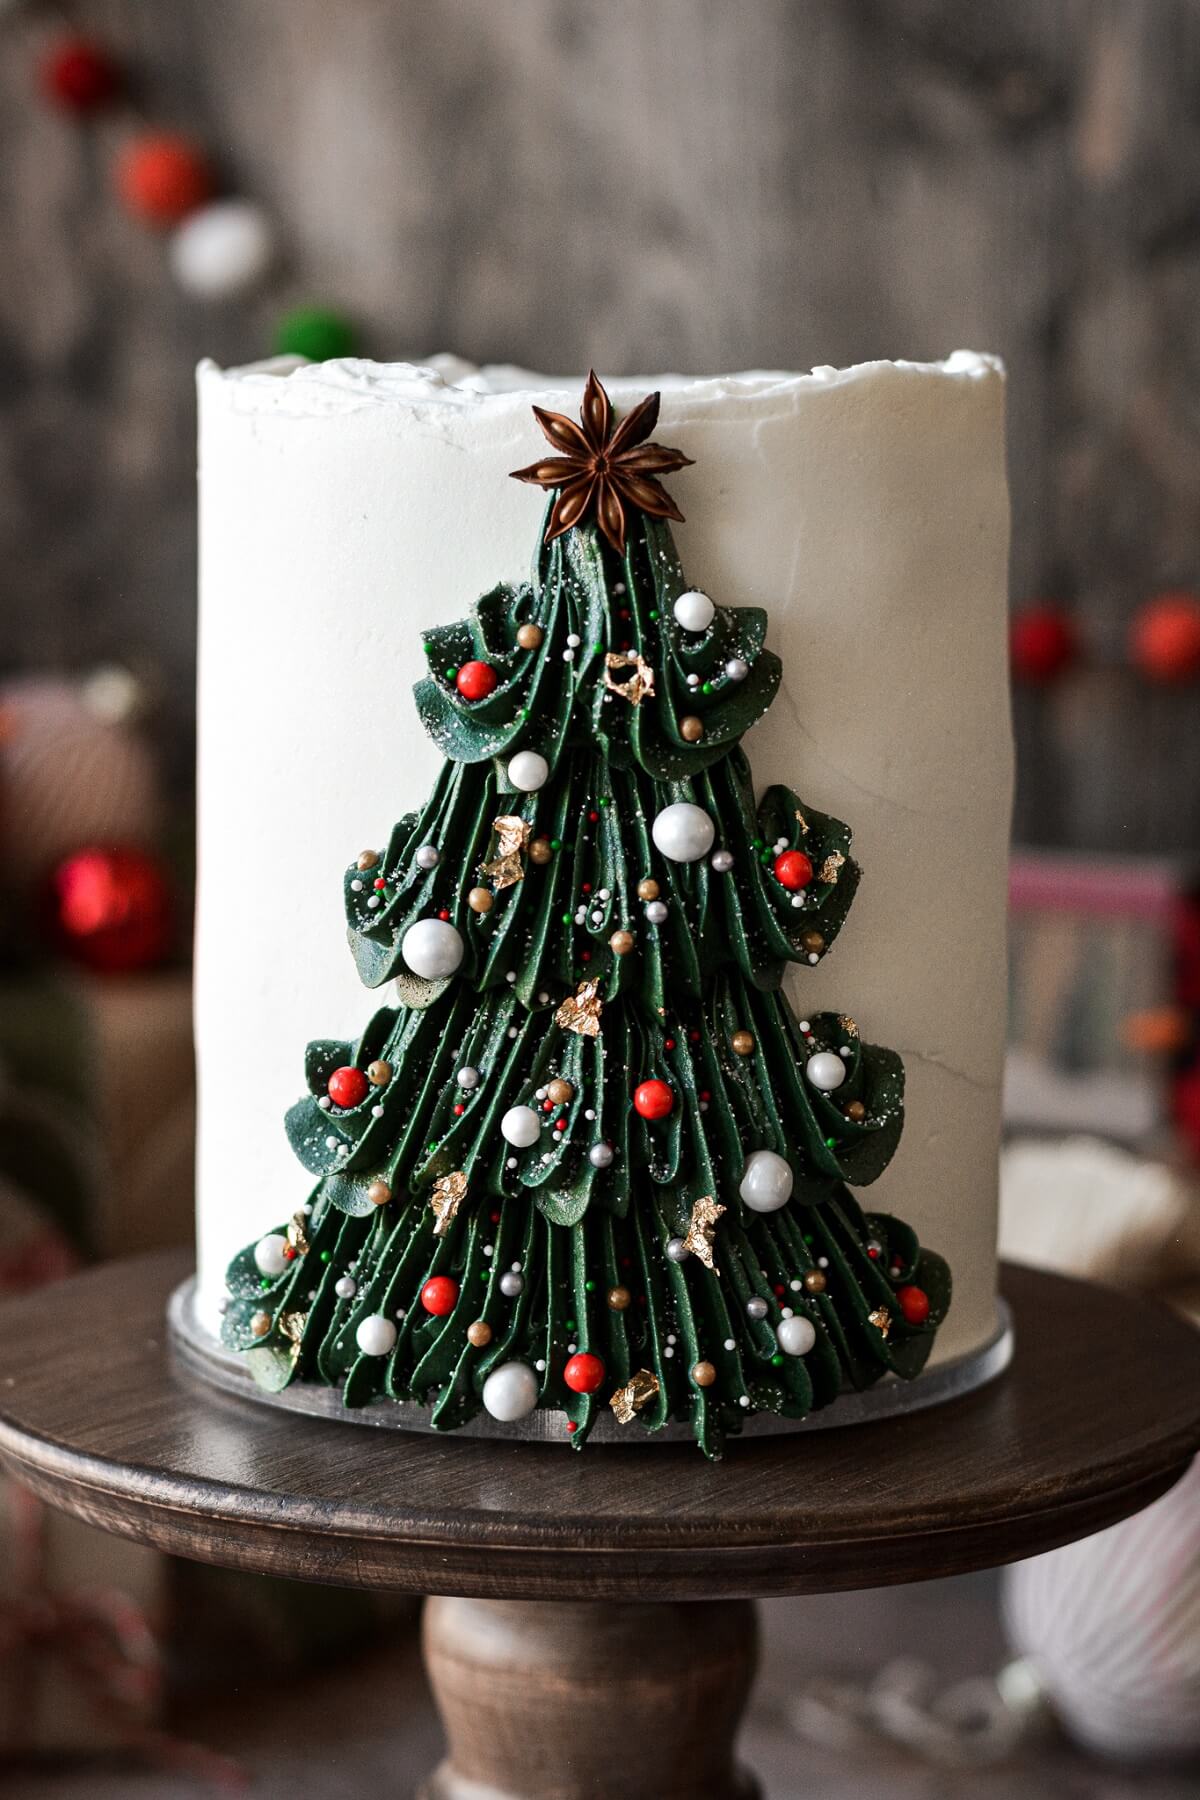 Buttercream Christmas tree piped onto a cake and decorated with sprinkle ornaments.